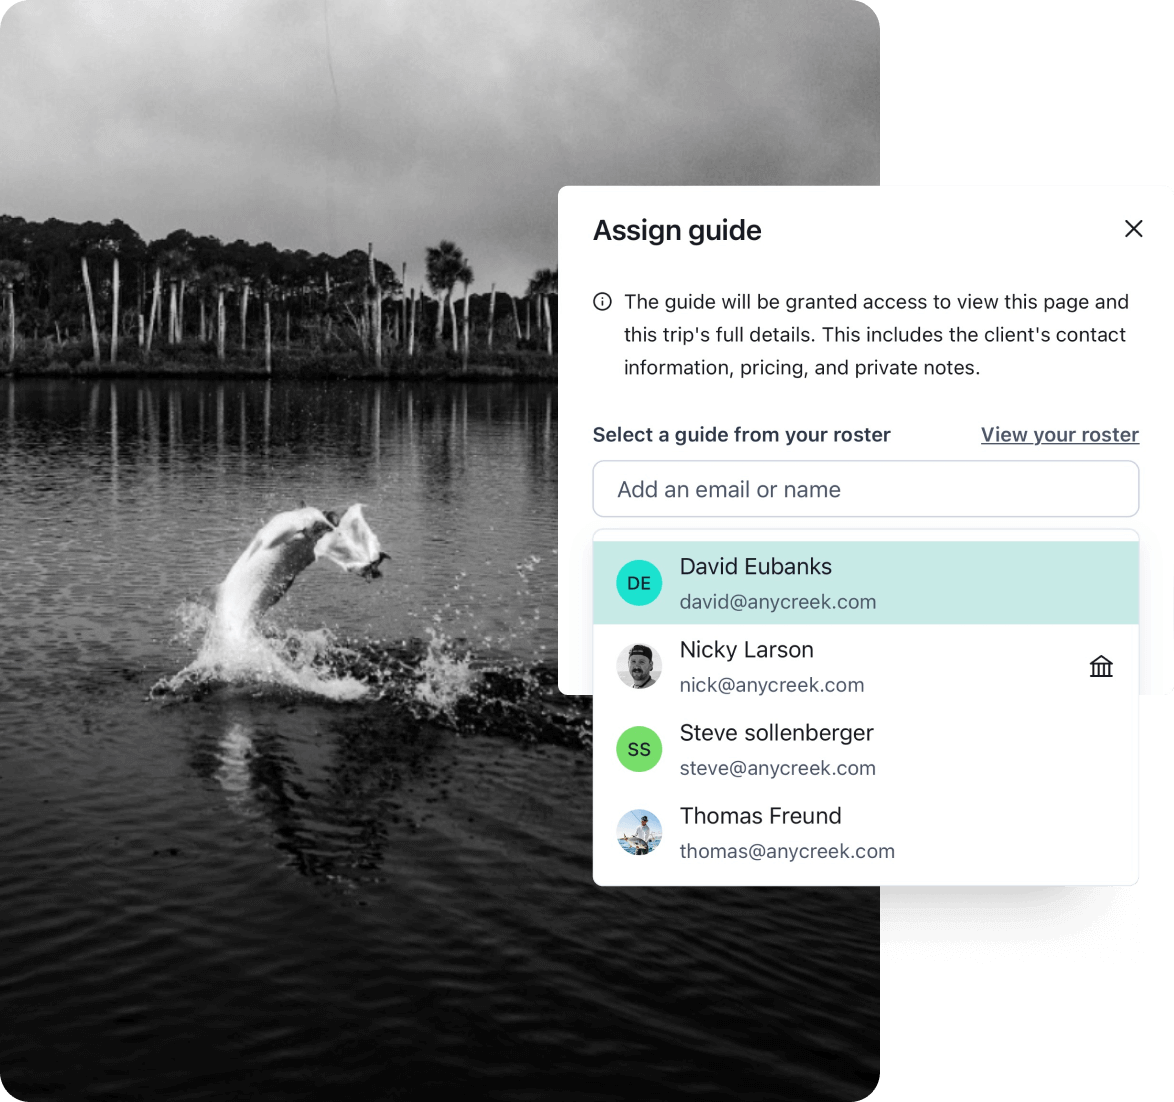 A photo of a large fish jumping out of the water and the AnyCreek "Assign guide" modal